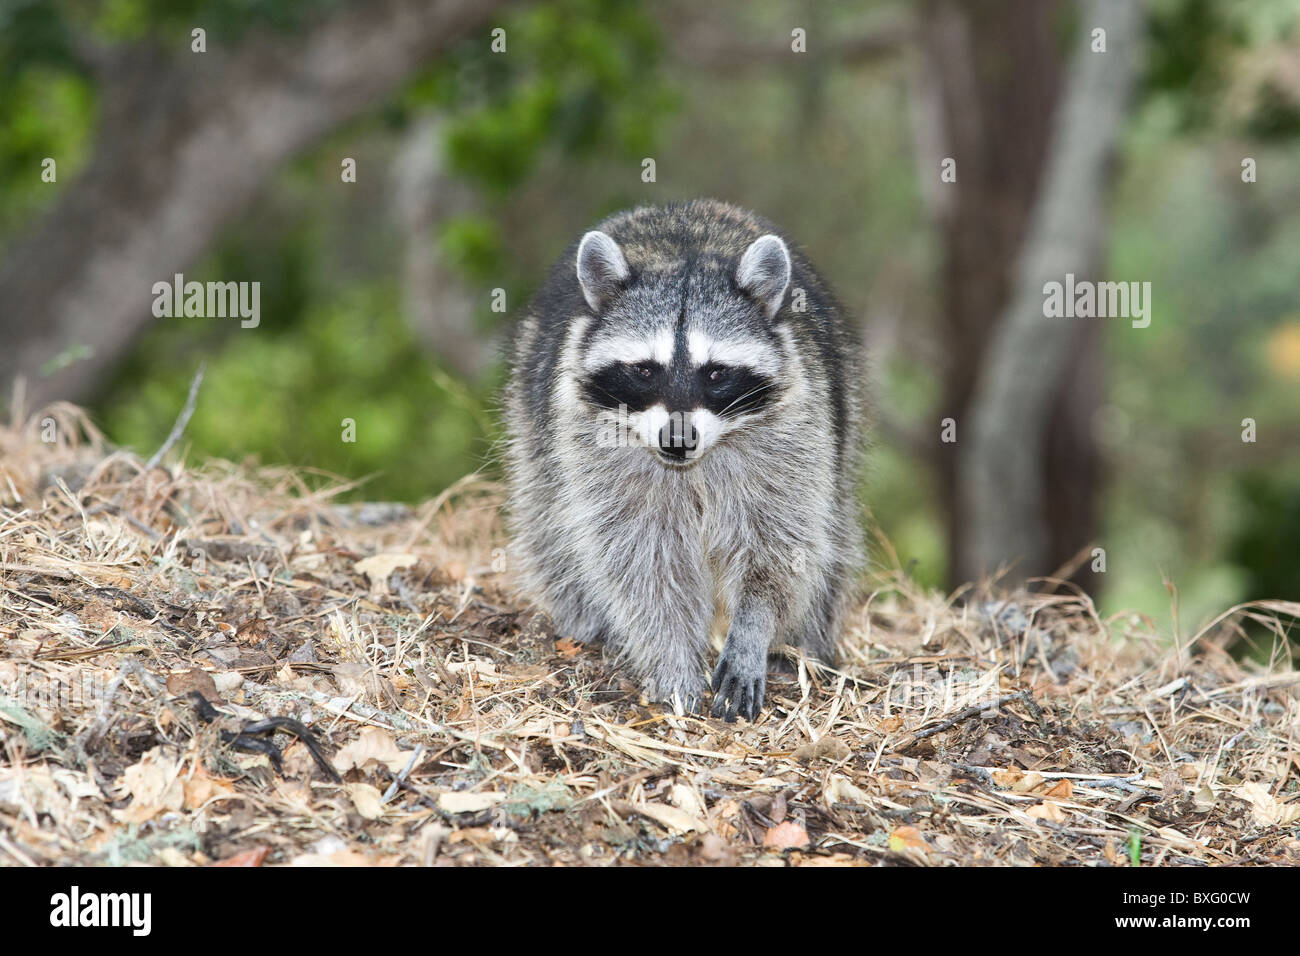 The Raccoon (Procyon lotor), also known as Common Raccoon, is a medium-sized mammal native to North America. Stock Photo